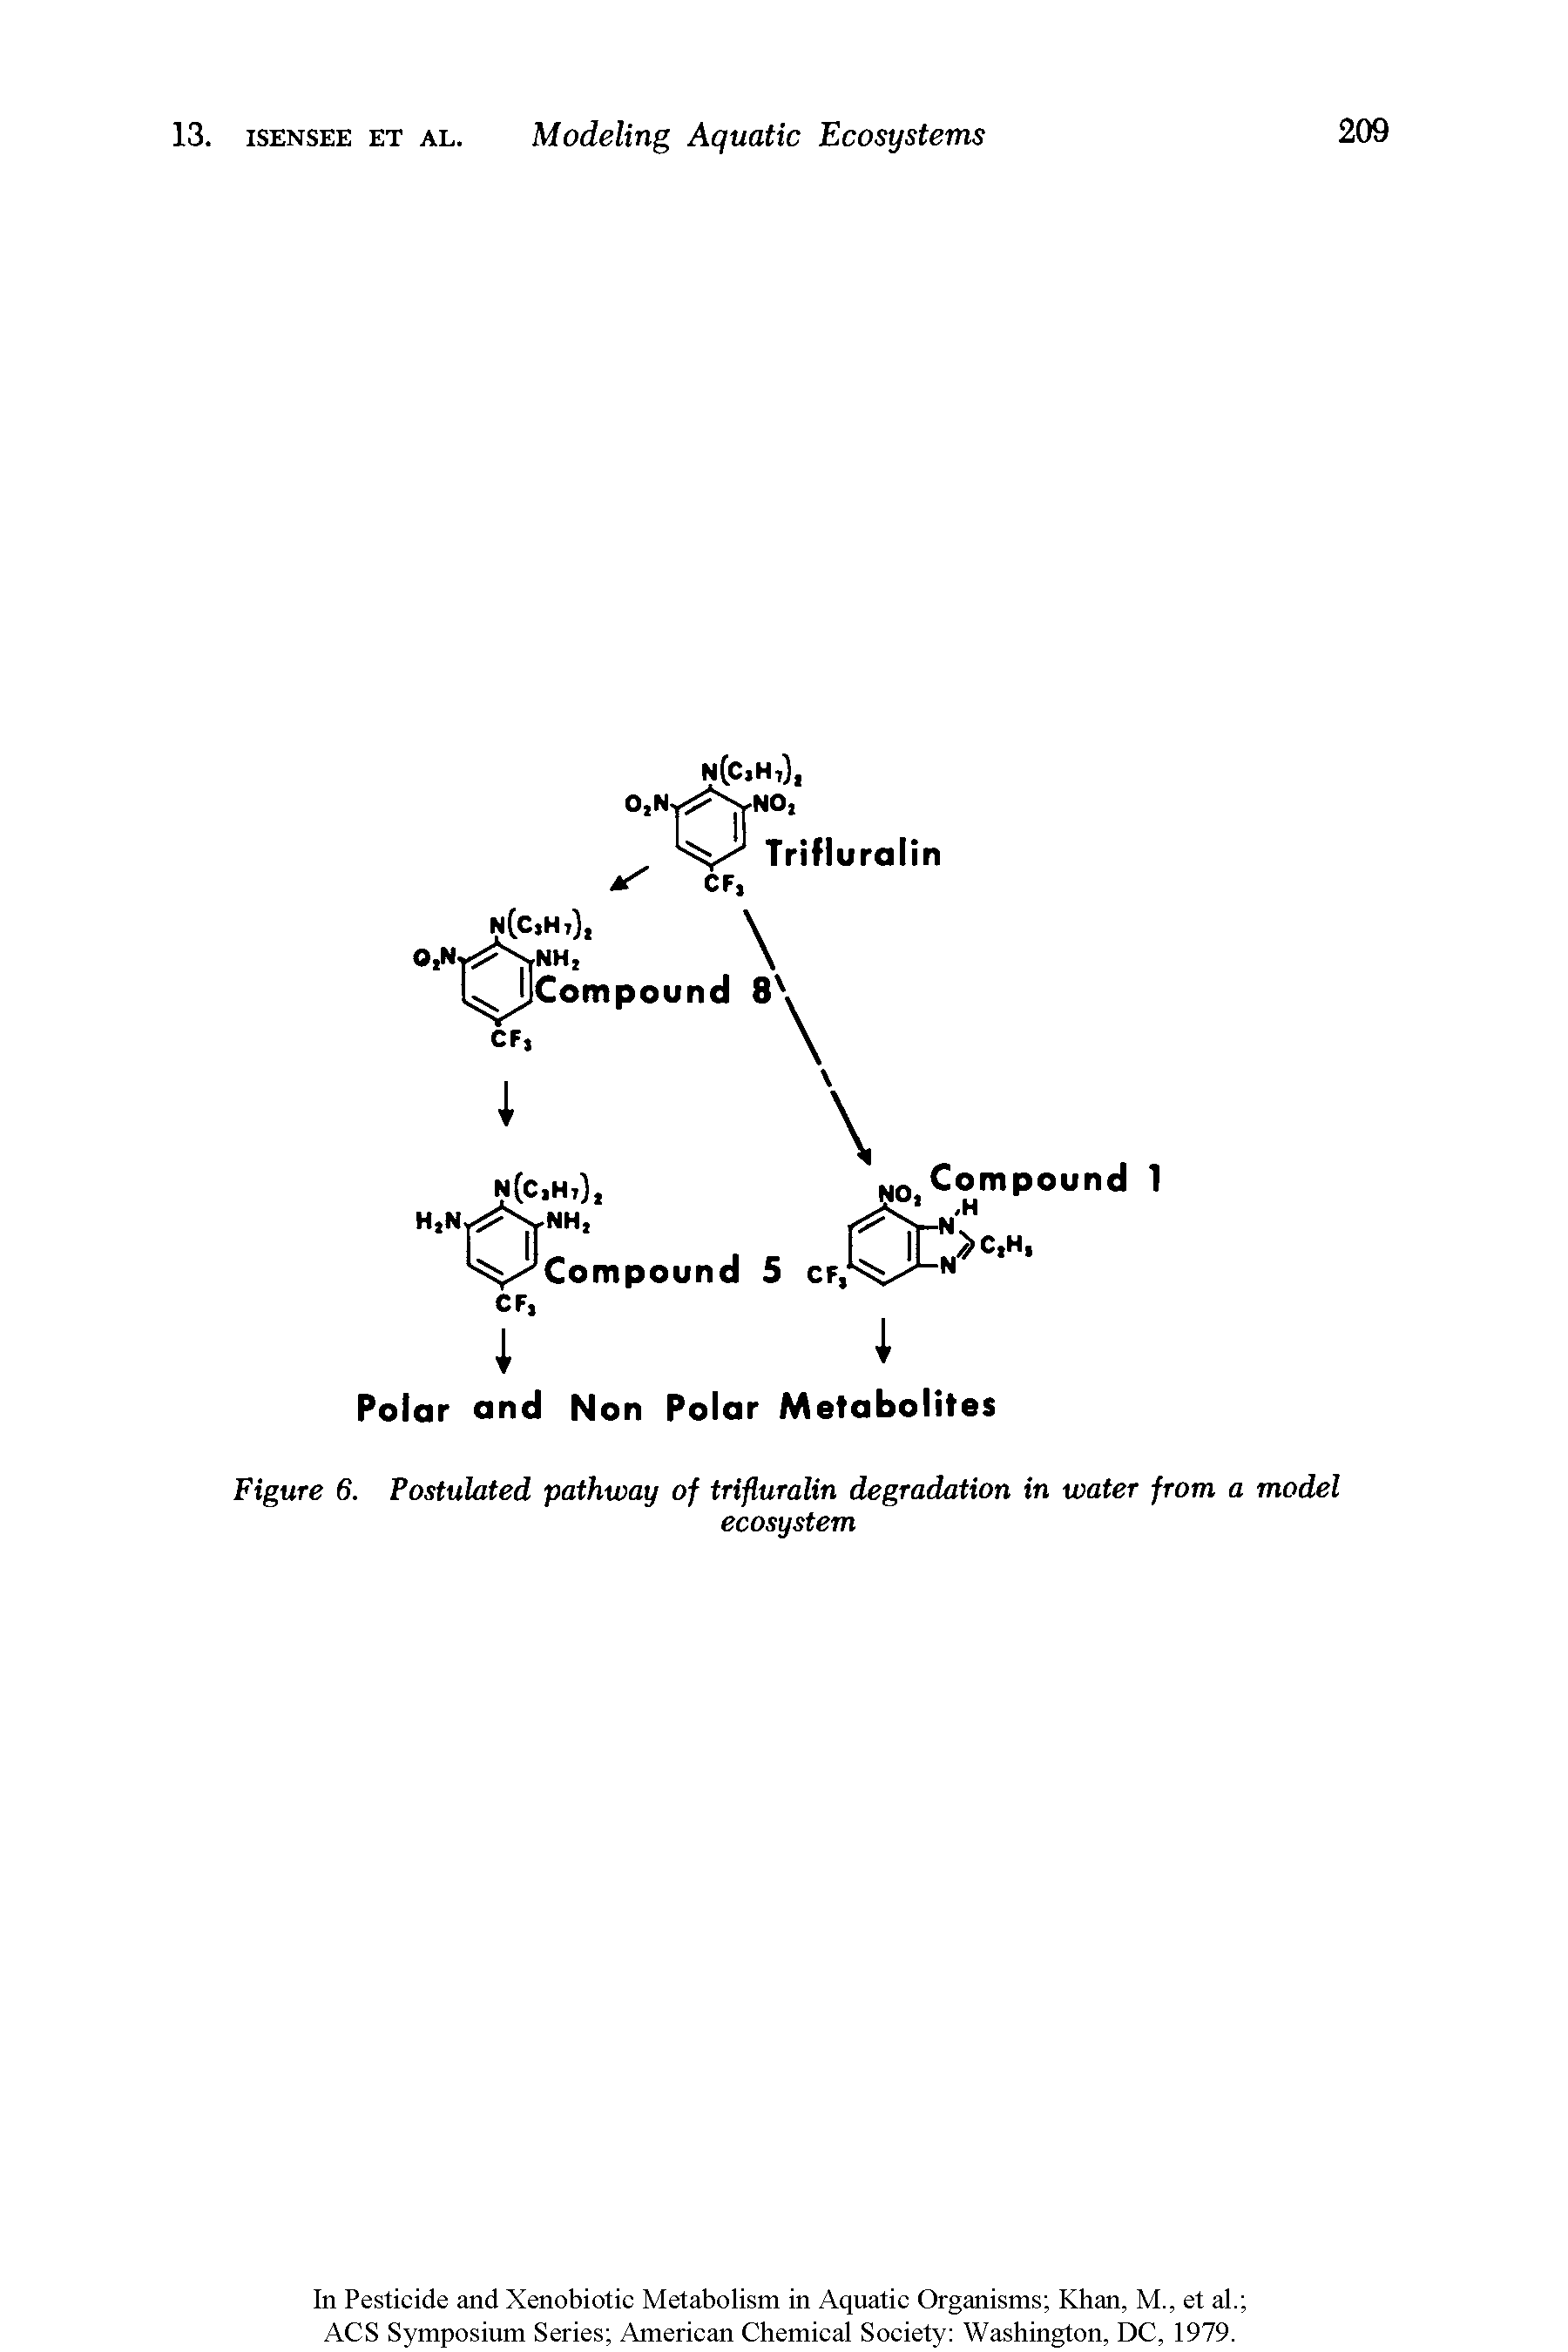 Figure 6. Postulated pathway of trifluralin degradation in water from a model...